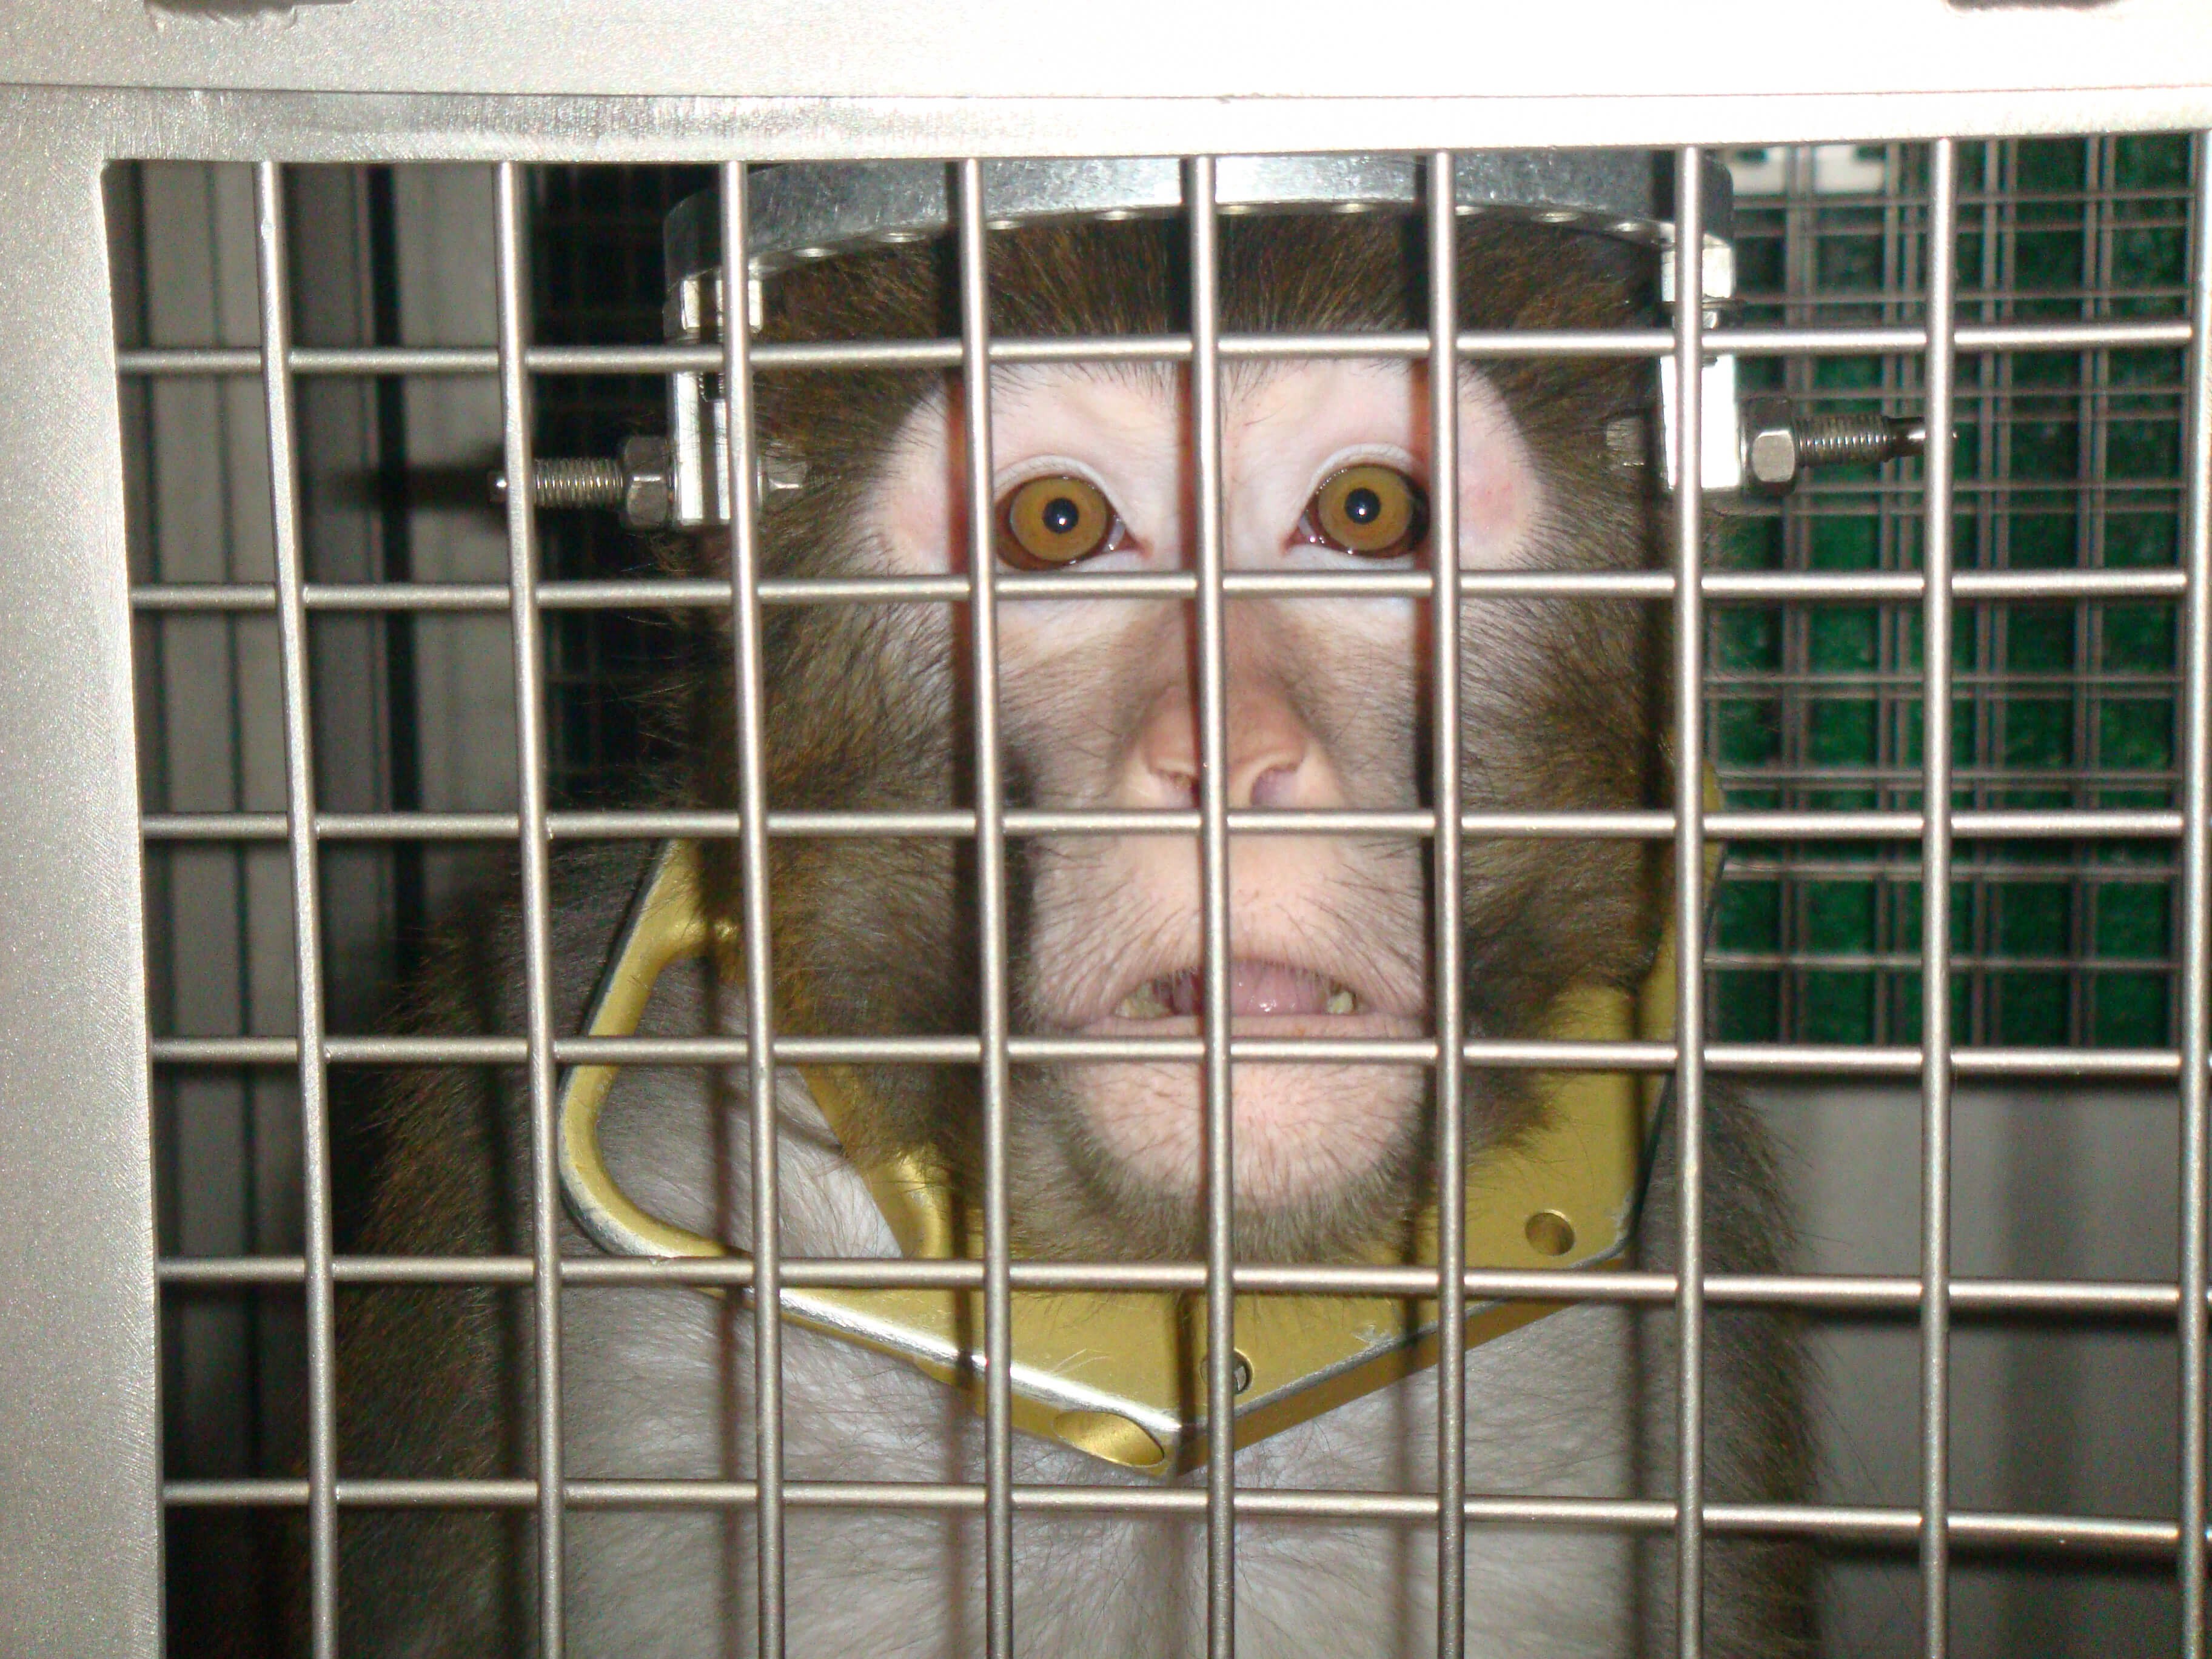 Experiments on Animals: Overview | PETA